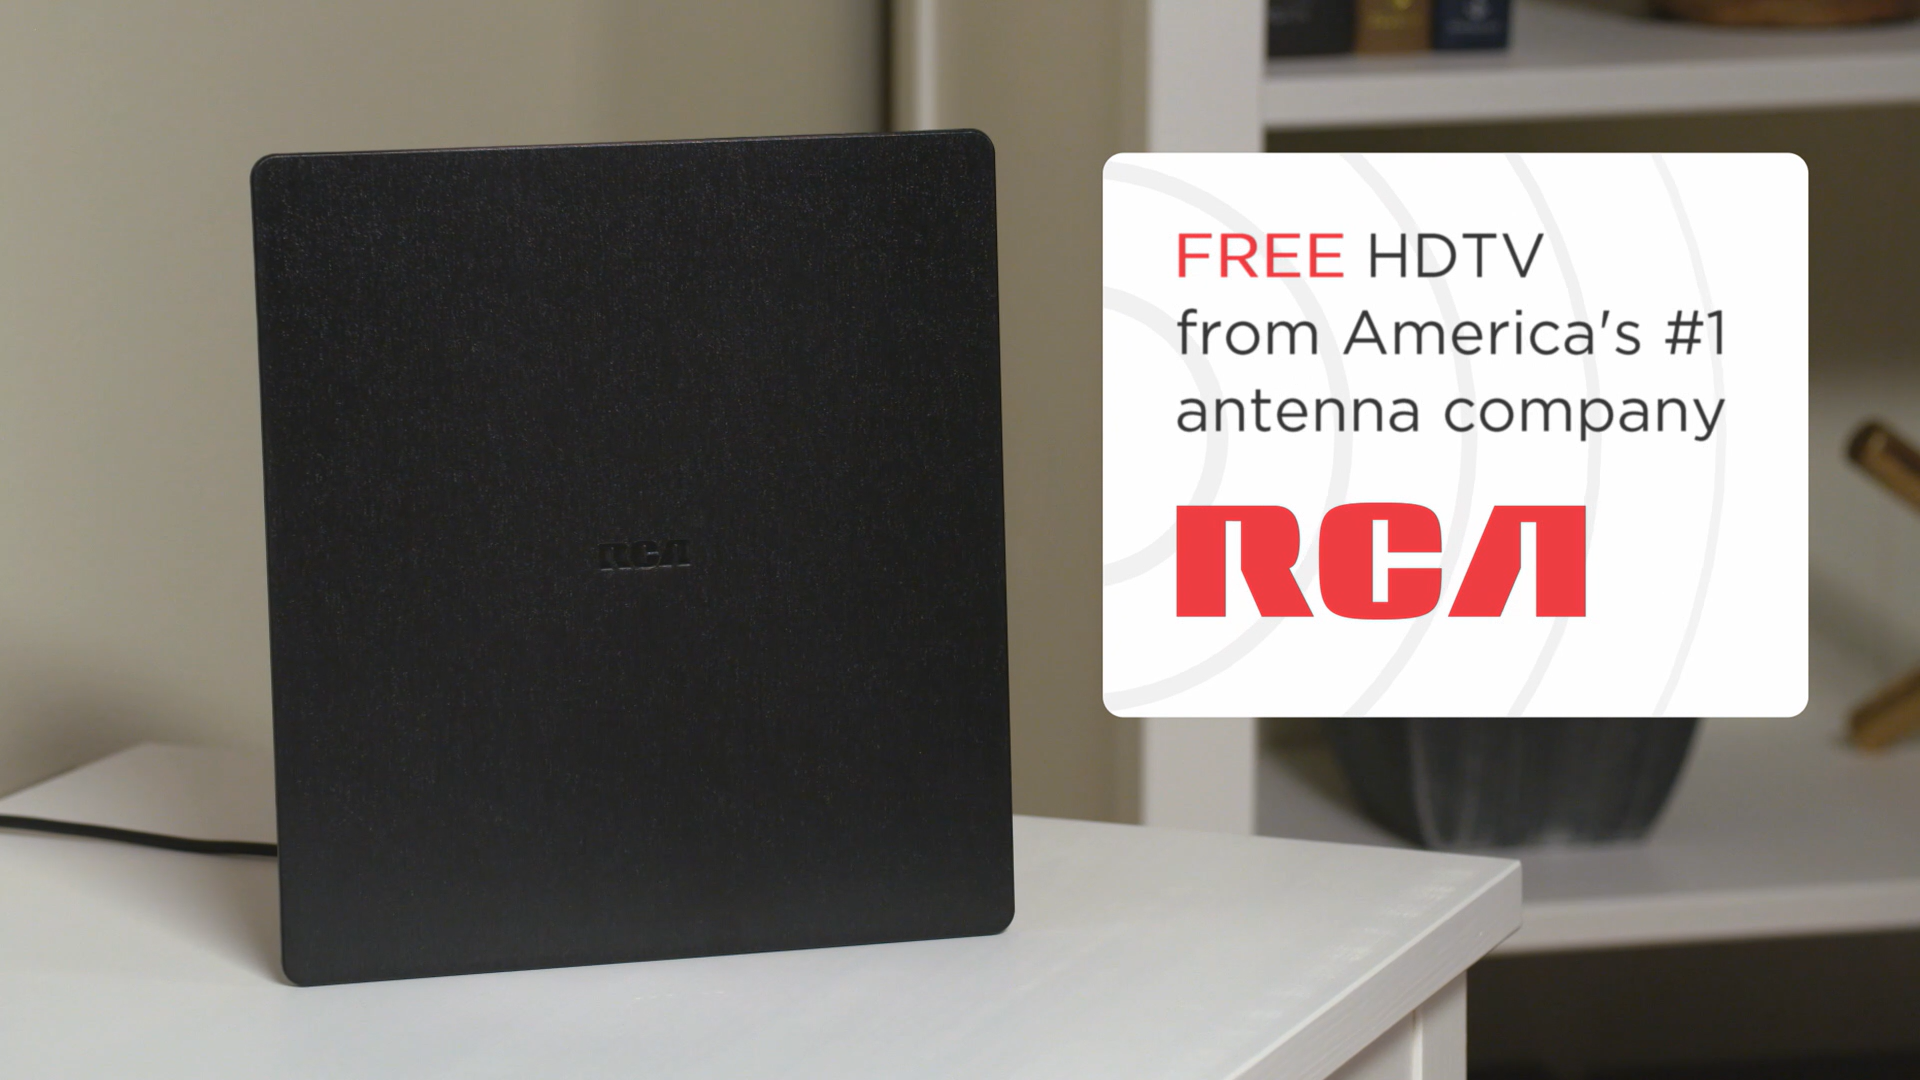 RCA Amplified Indoor Flat Black HDTV Antenna - Multi-Directional with Built-in Stand & up to 55-mile Range ANT1560E - image 2 of 8